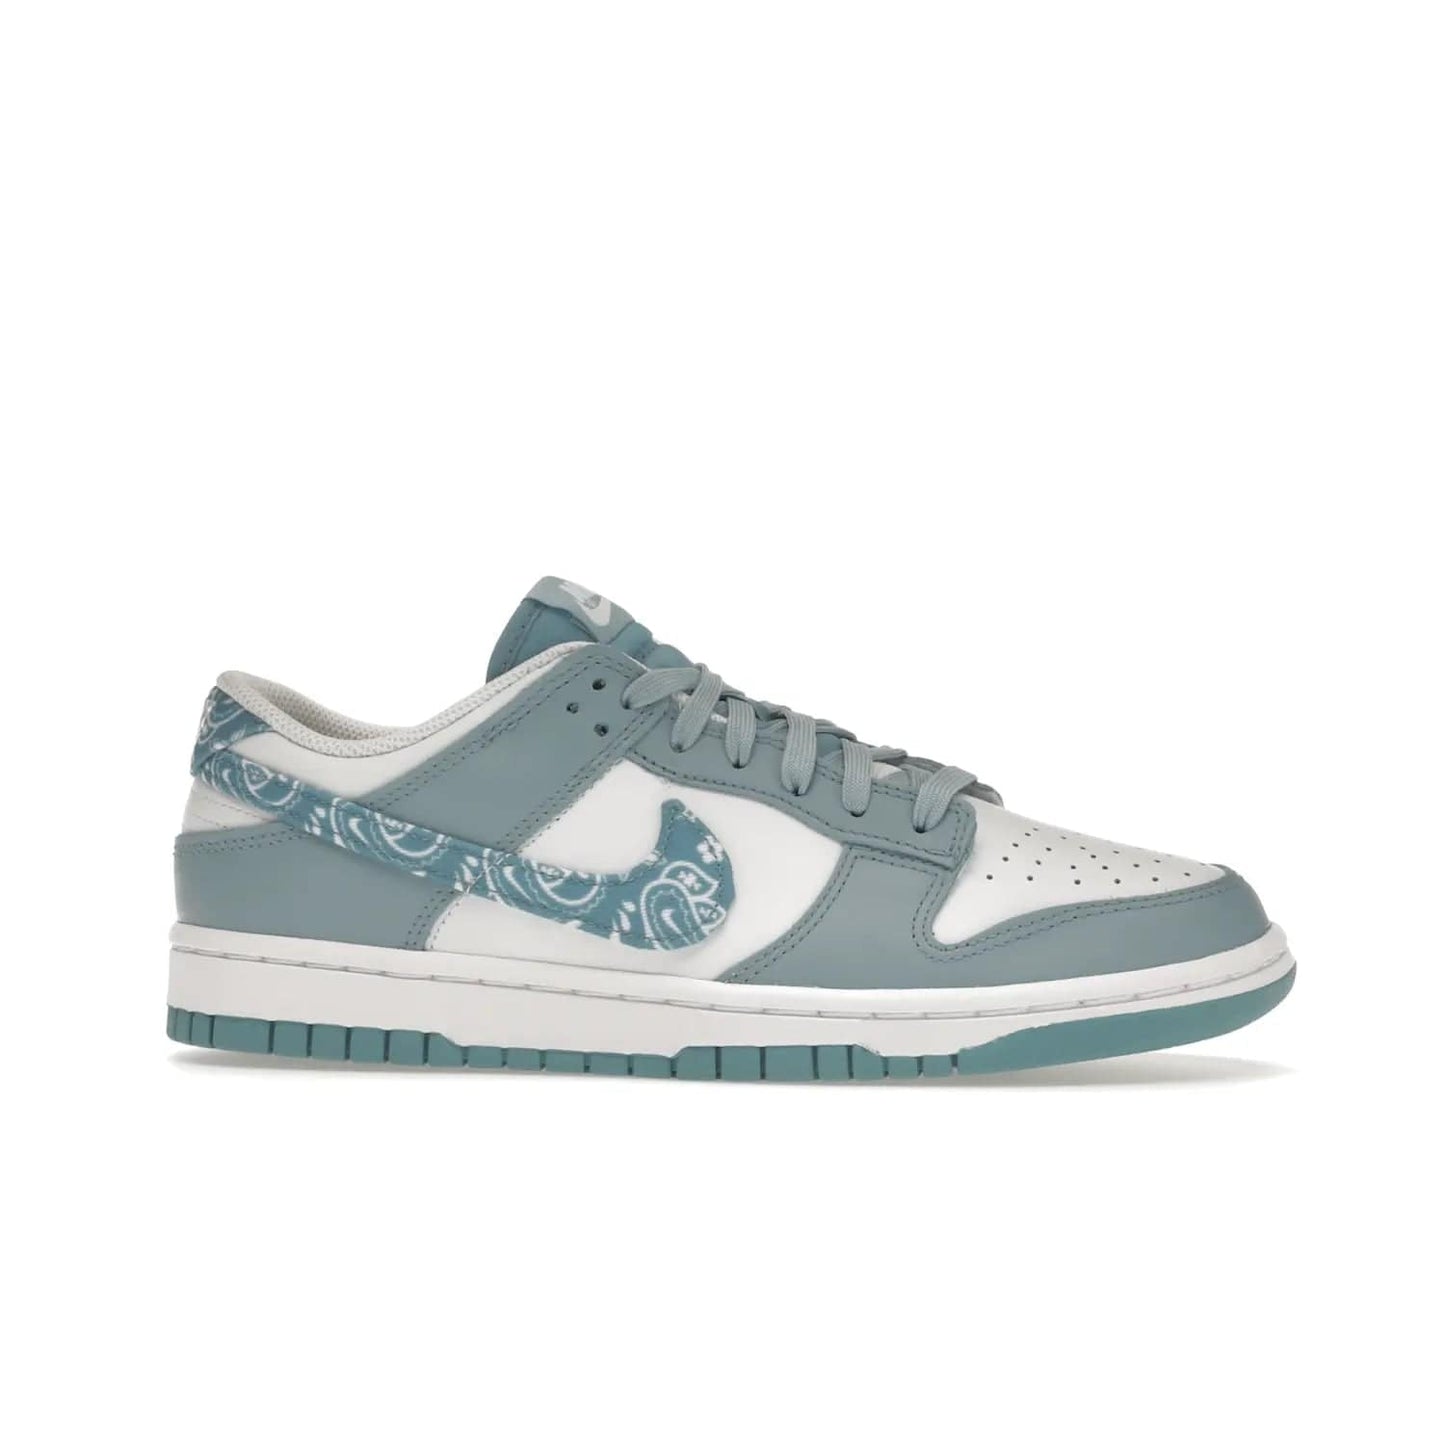 Nike Dunk Low Essential Paisley Pack Worn Blue (Women's) - Image 2 - Only at www.BallersClubKickz.com - Get the Nike Dunk Low Essential Paisley Pack Worn Blue (Women's) for style and comfort. White leather construction, light blue leather overlays, canvas Swooshes and matching heel tabs offer a rich blue hue. Finished by a white and light blue sole, this classic Nike Dunk is the perfect addition to any wardrobe. Released in March 2022.